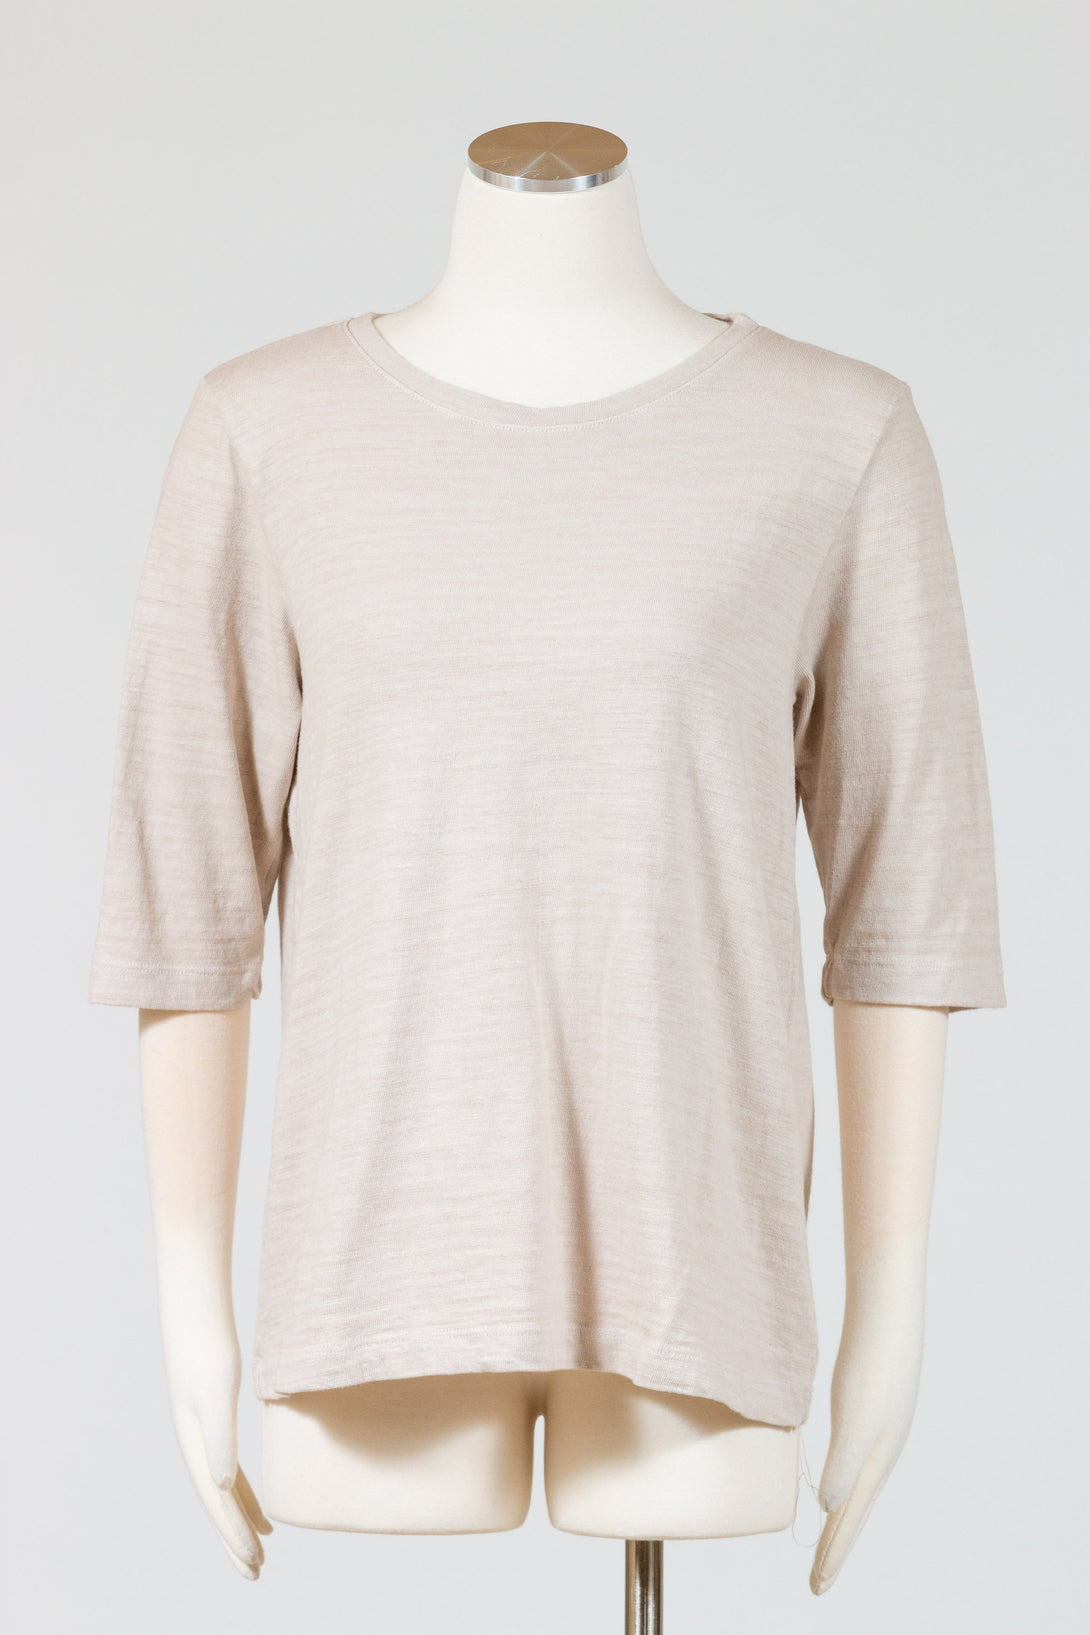 CP Shades's Marissa Top is cotton tee with a scoop neck and elbow length sleeves.